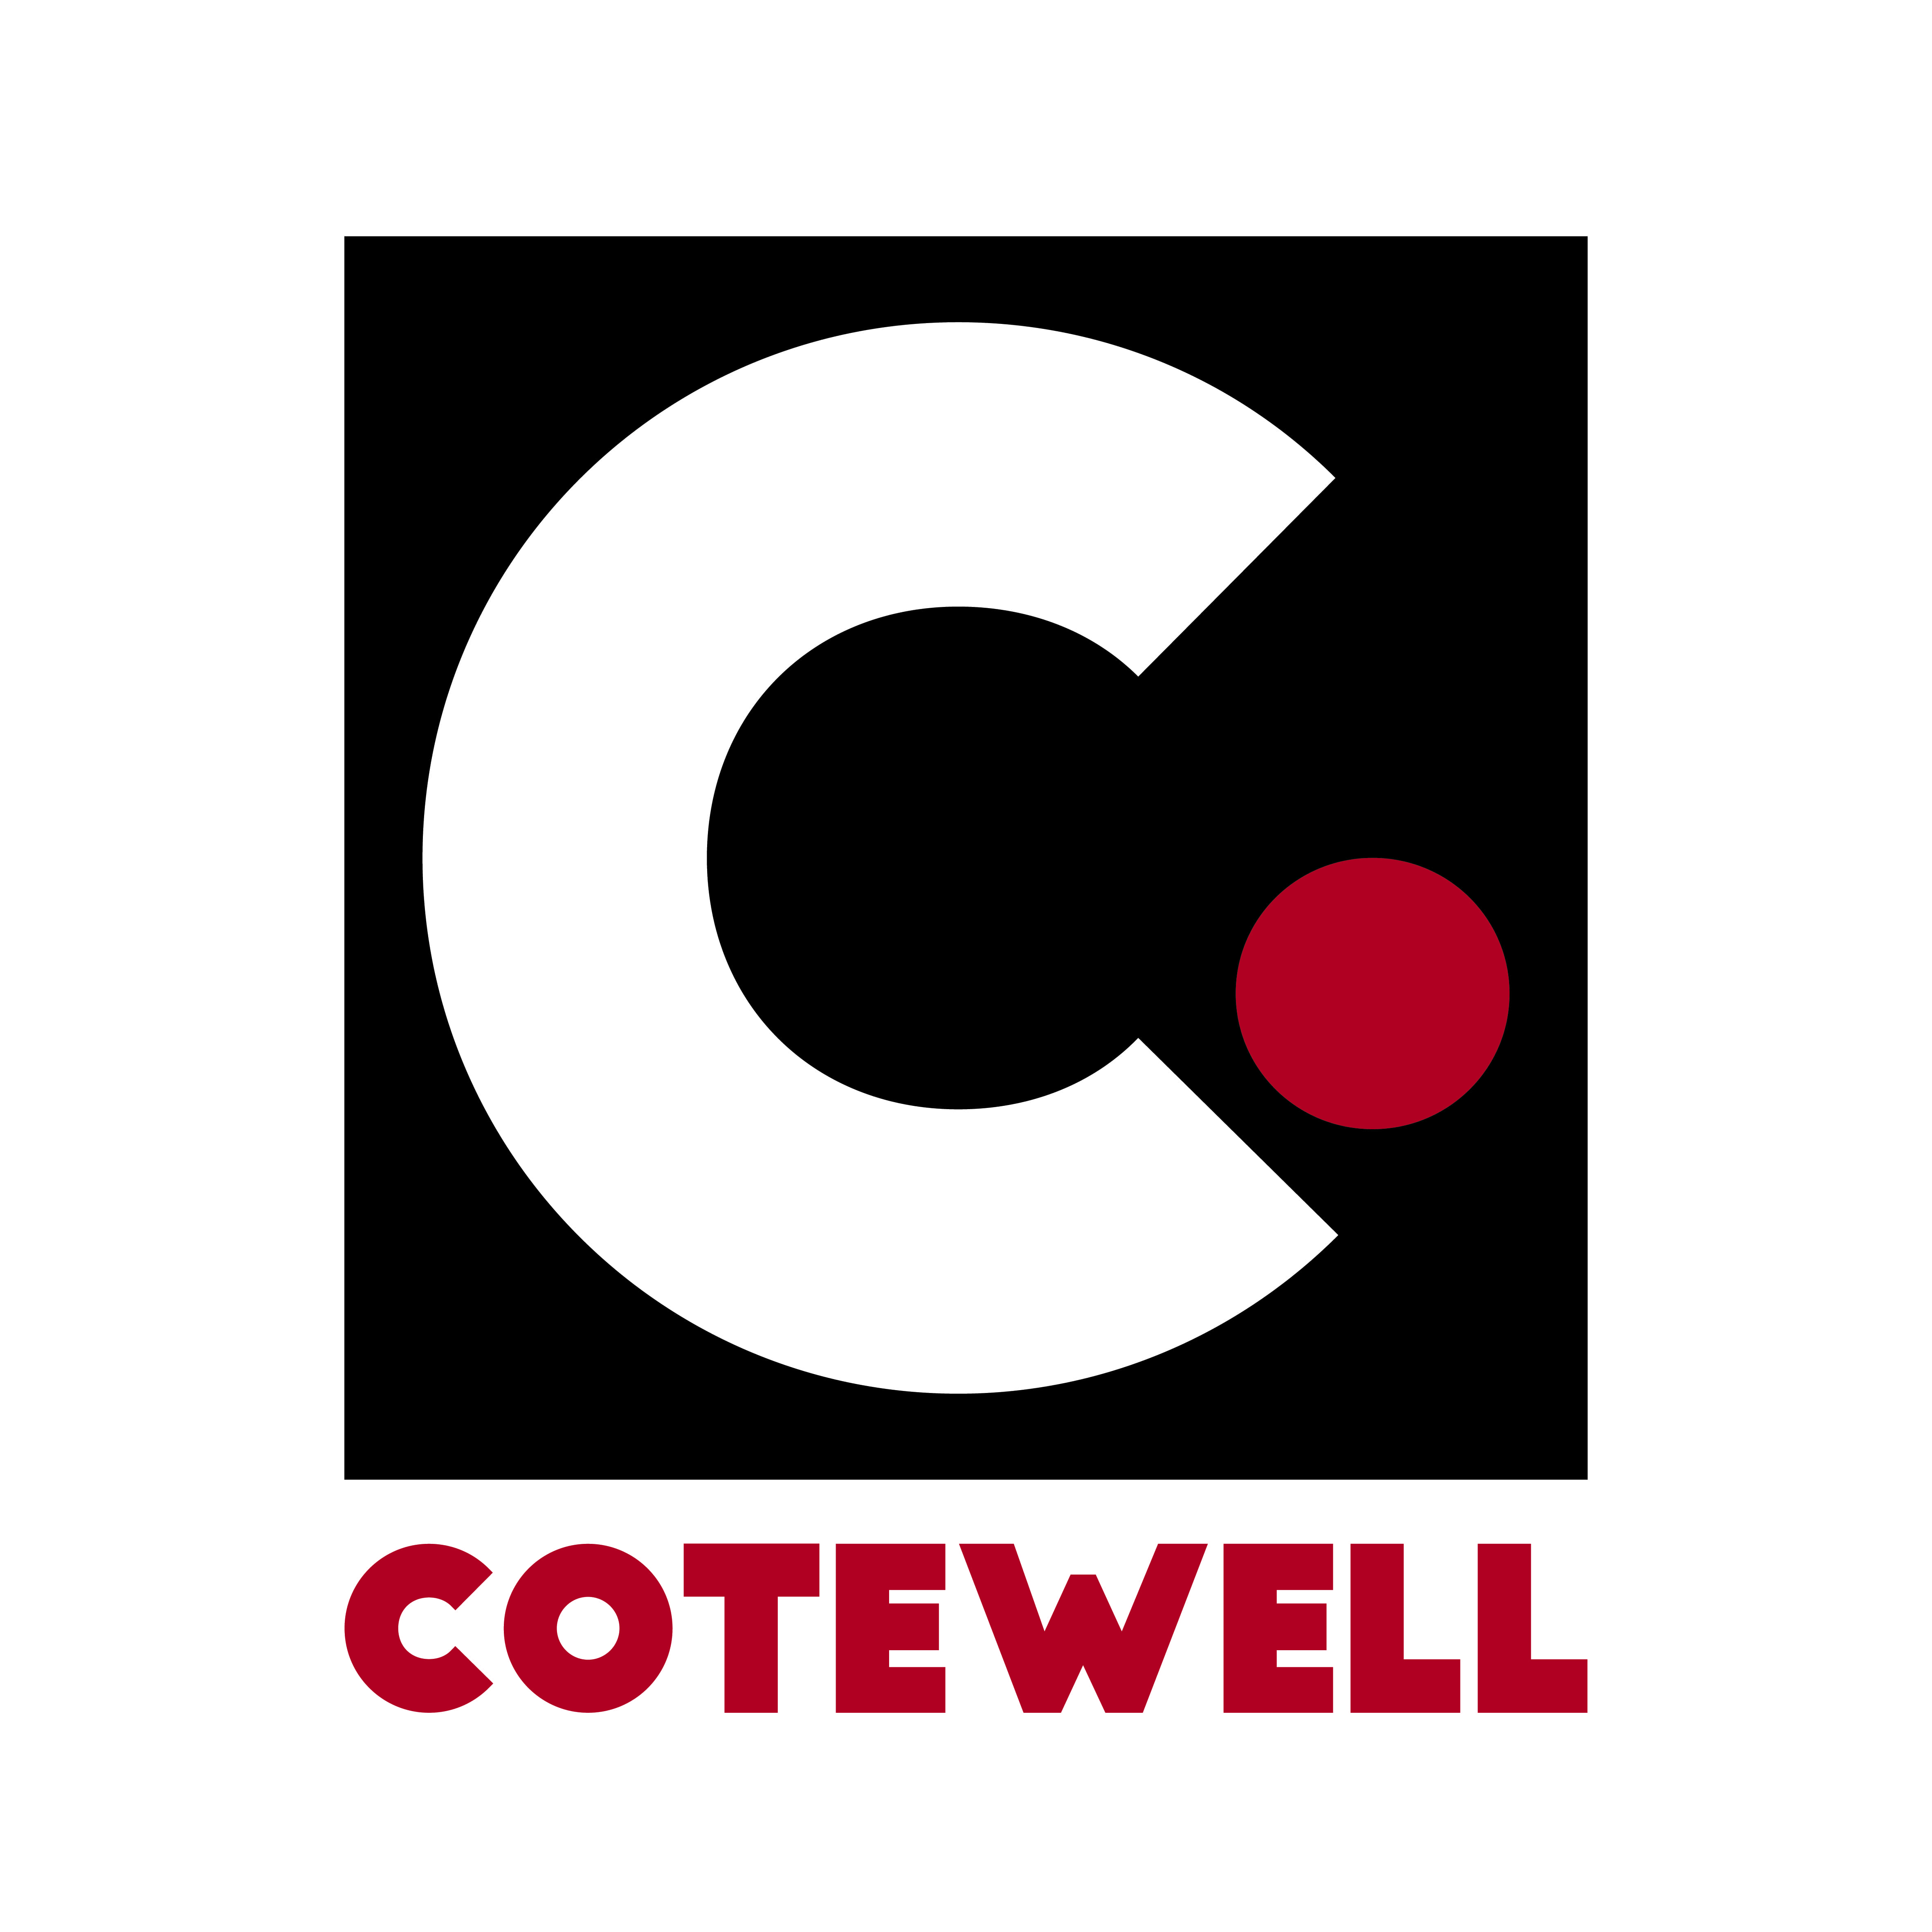 COTEWELL - Safety Flooring & Line Marking